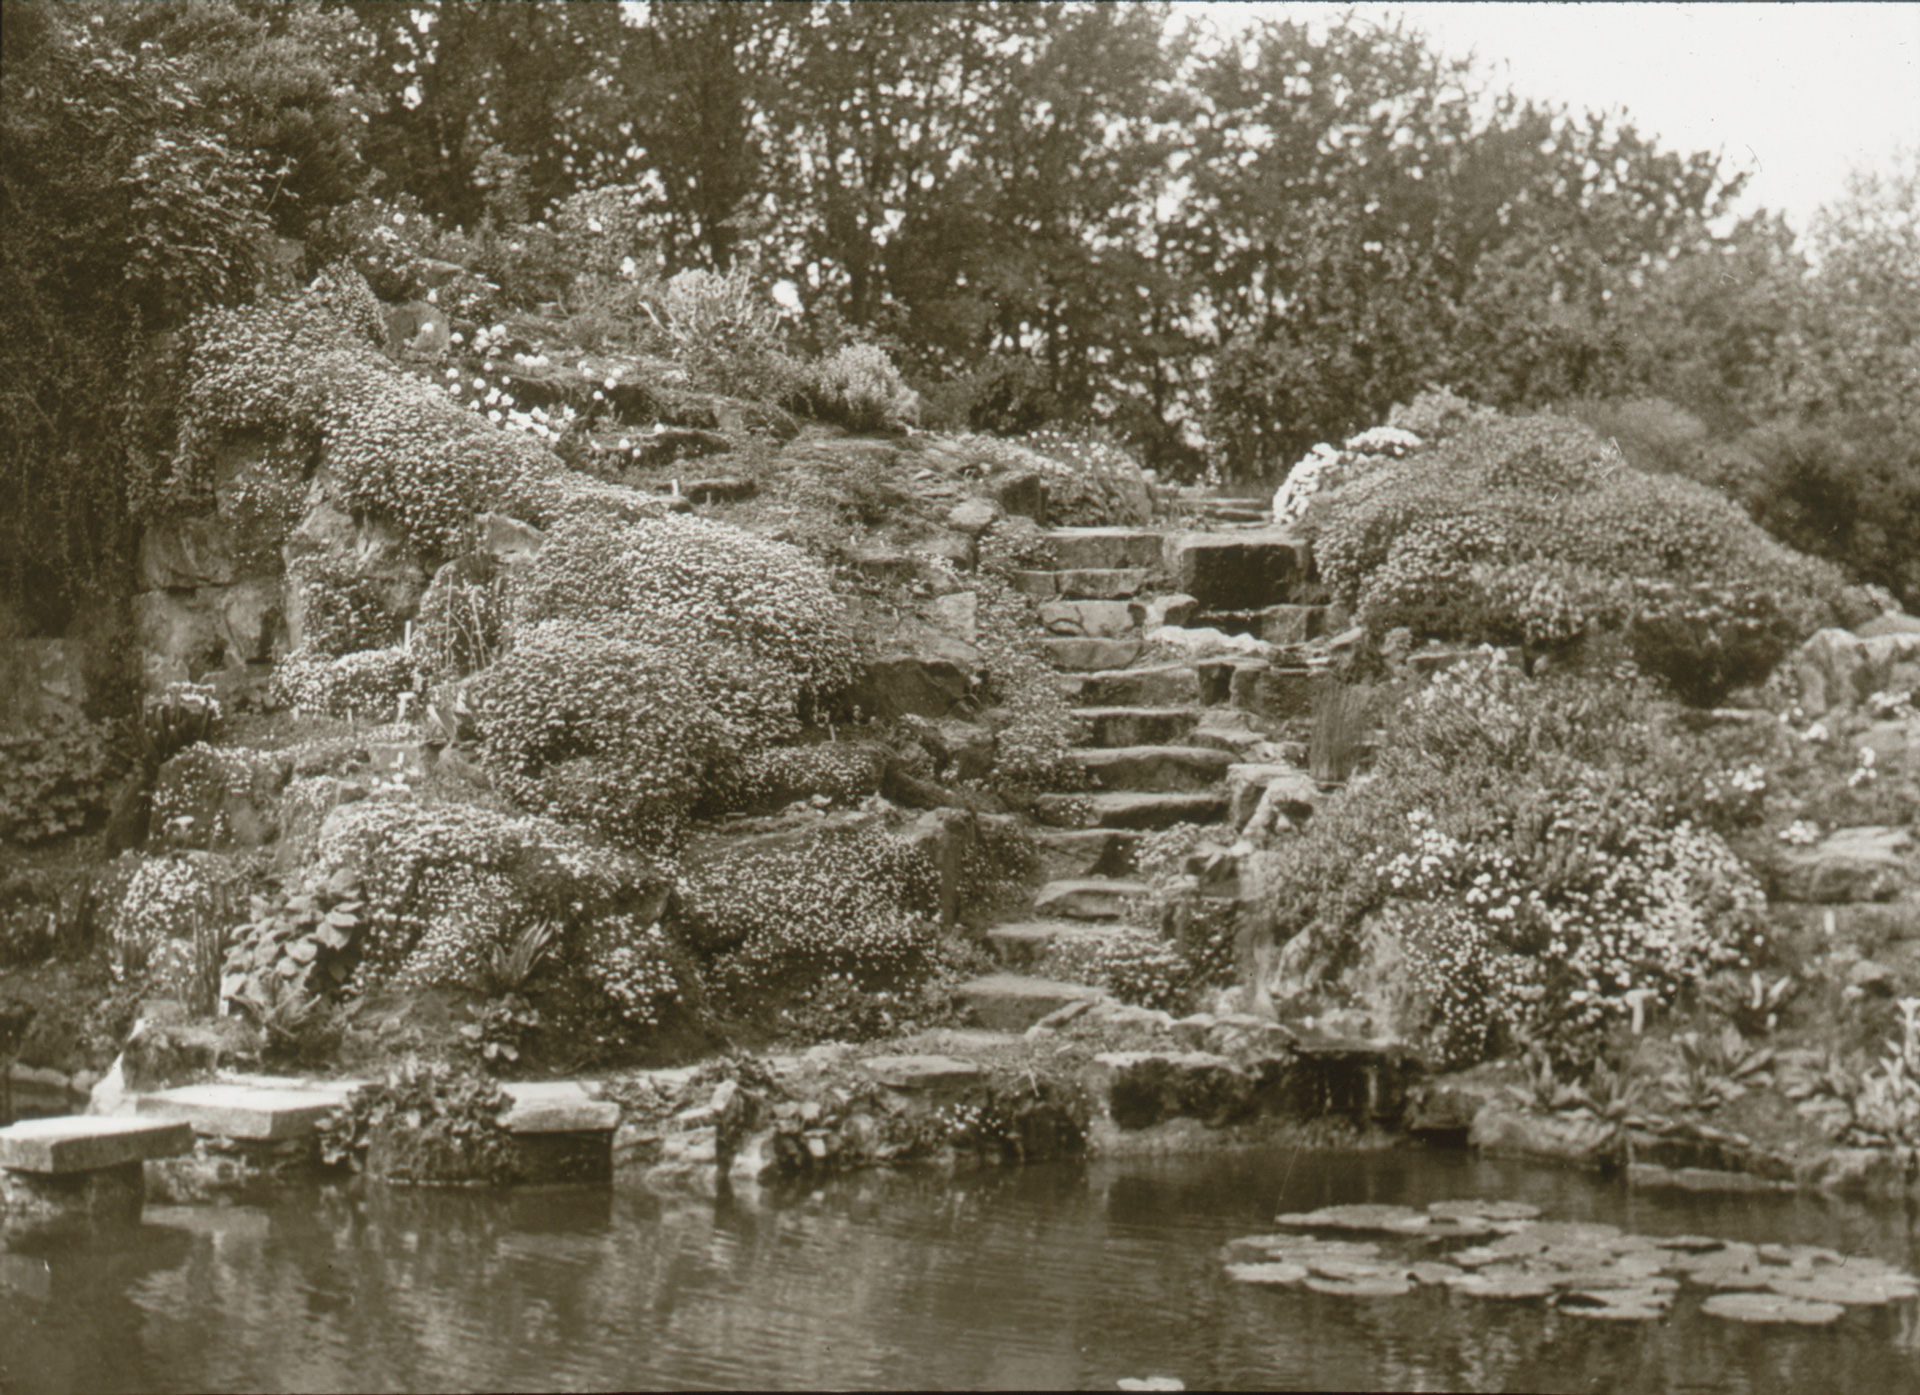 Part of Highdown’s first rock garden in 1935. Lantern slide from Stern collection, West Sussex Record Office.